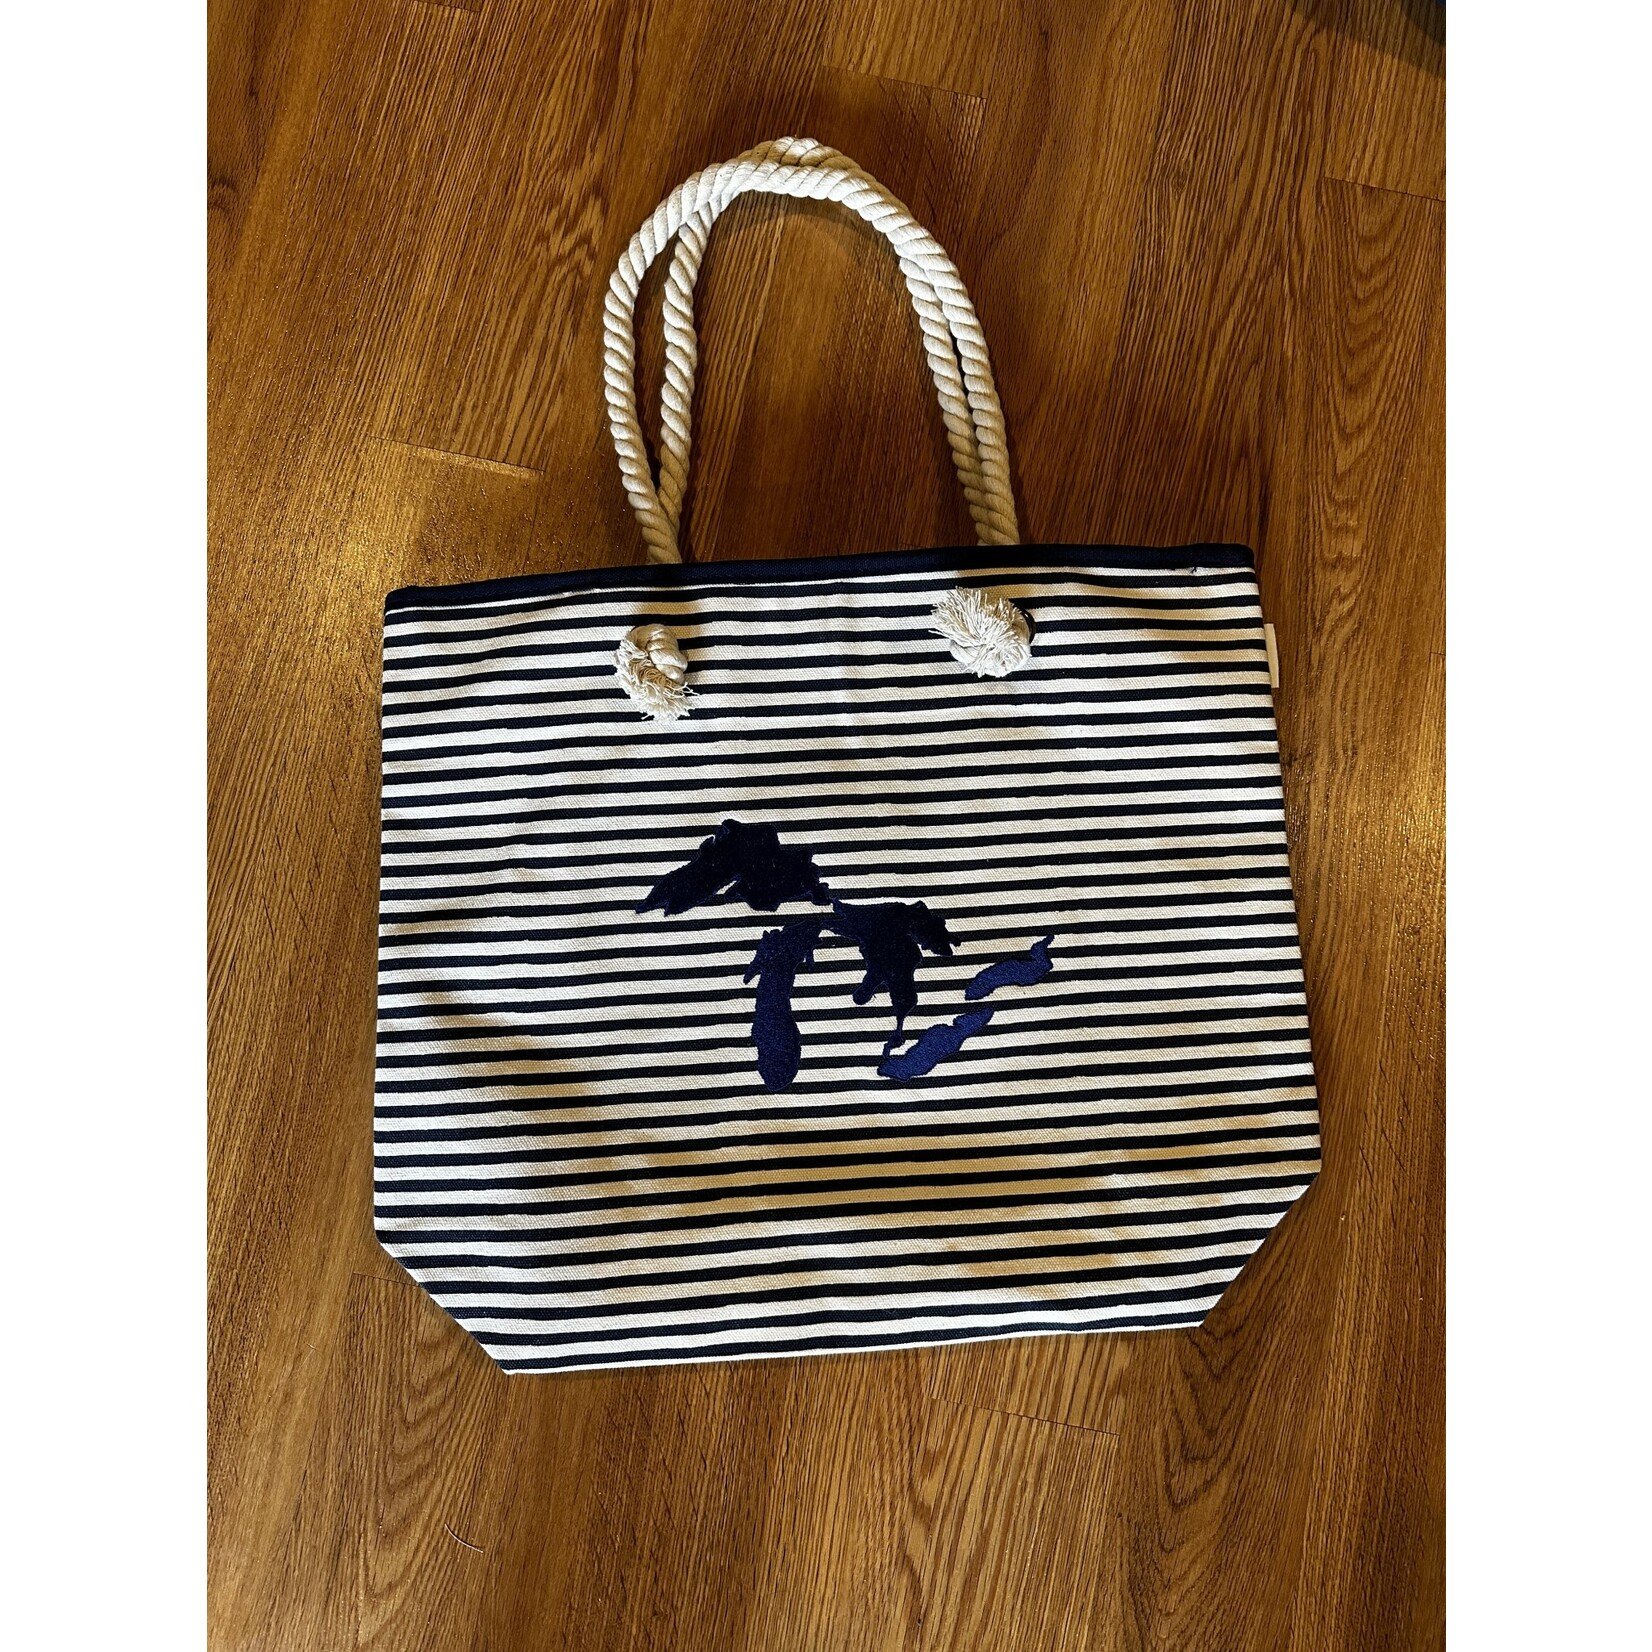 Bear Den Brand - 'Toskey Totes 'Toskey Tote - Great Lakes Striped Rope Tote